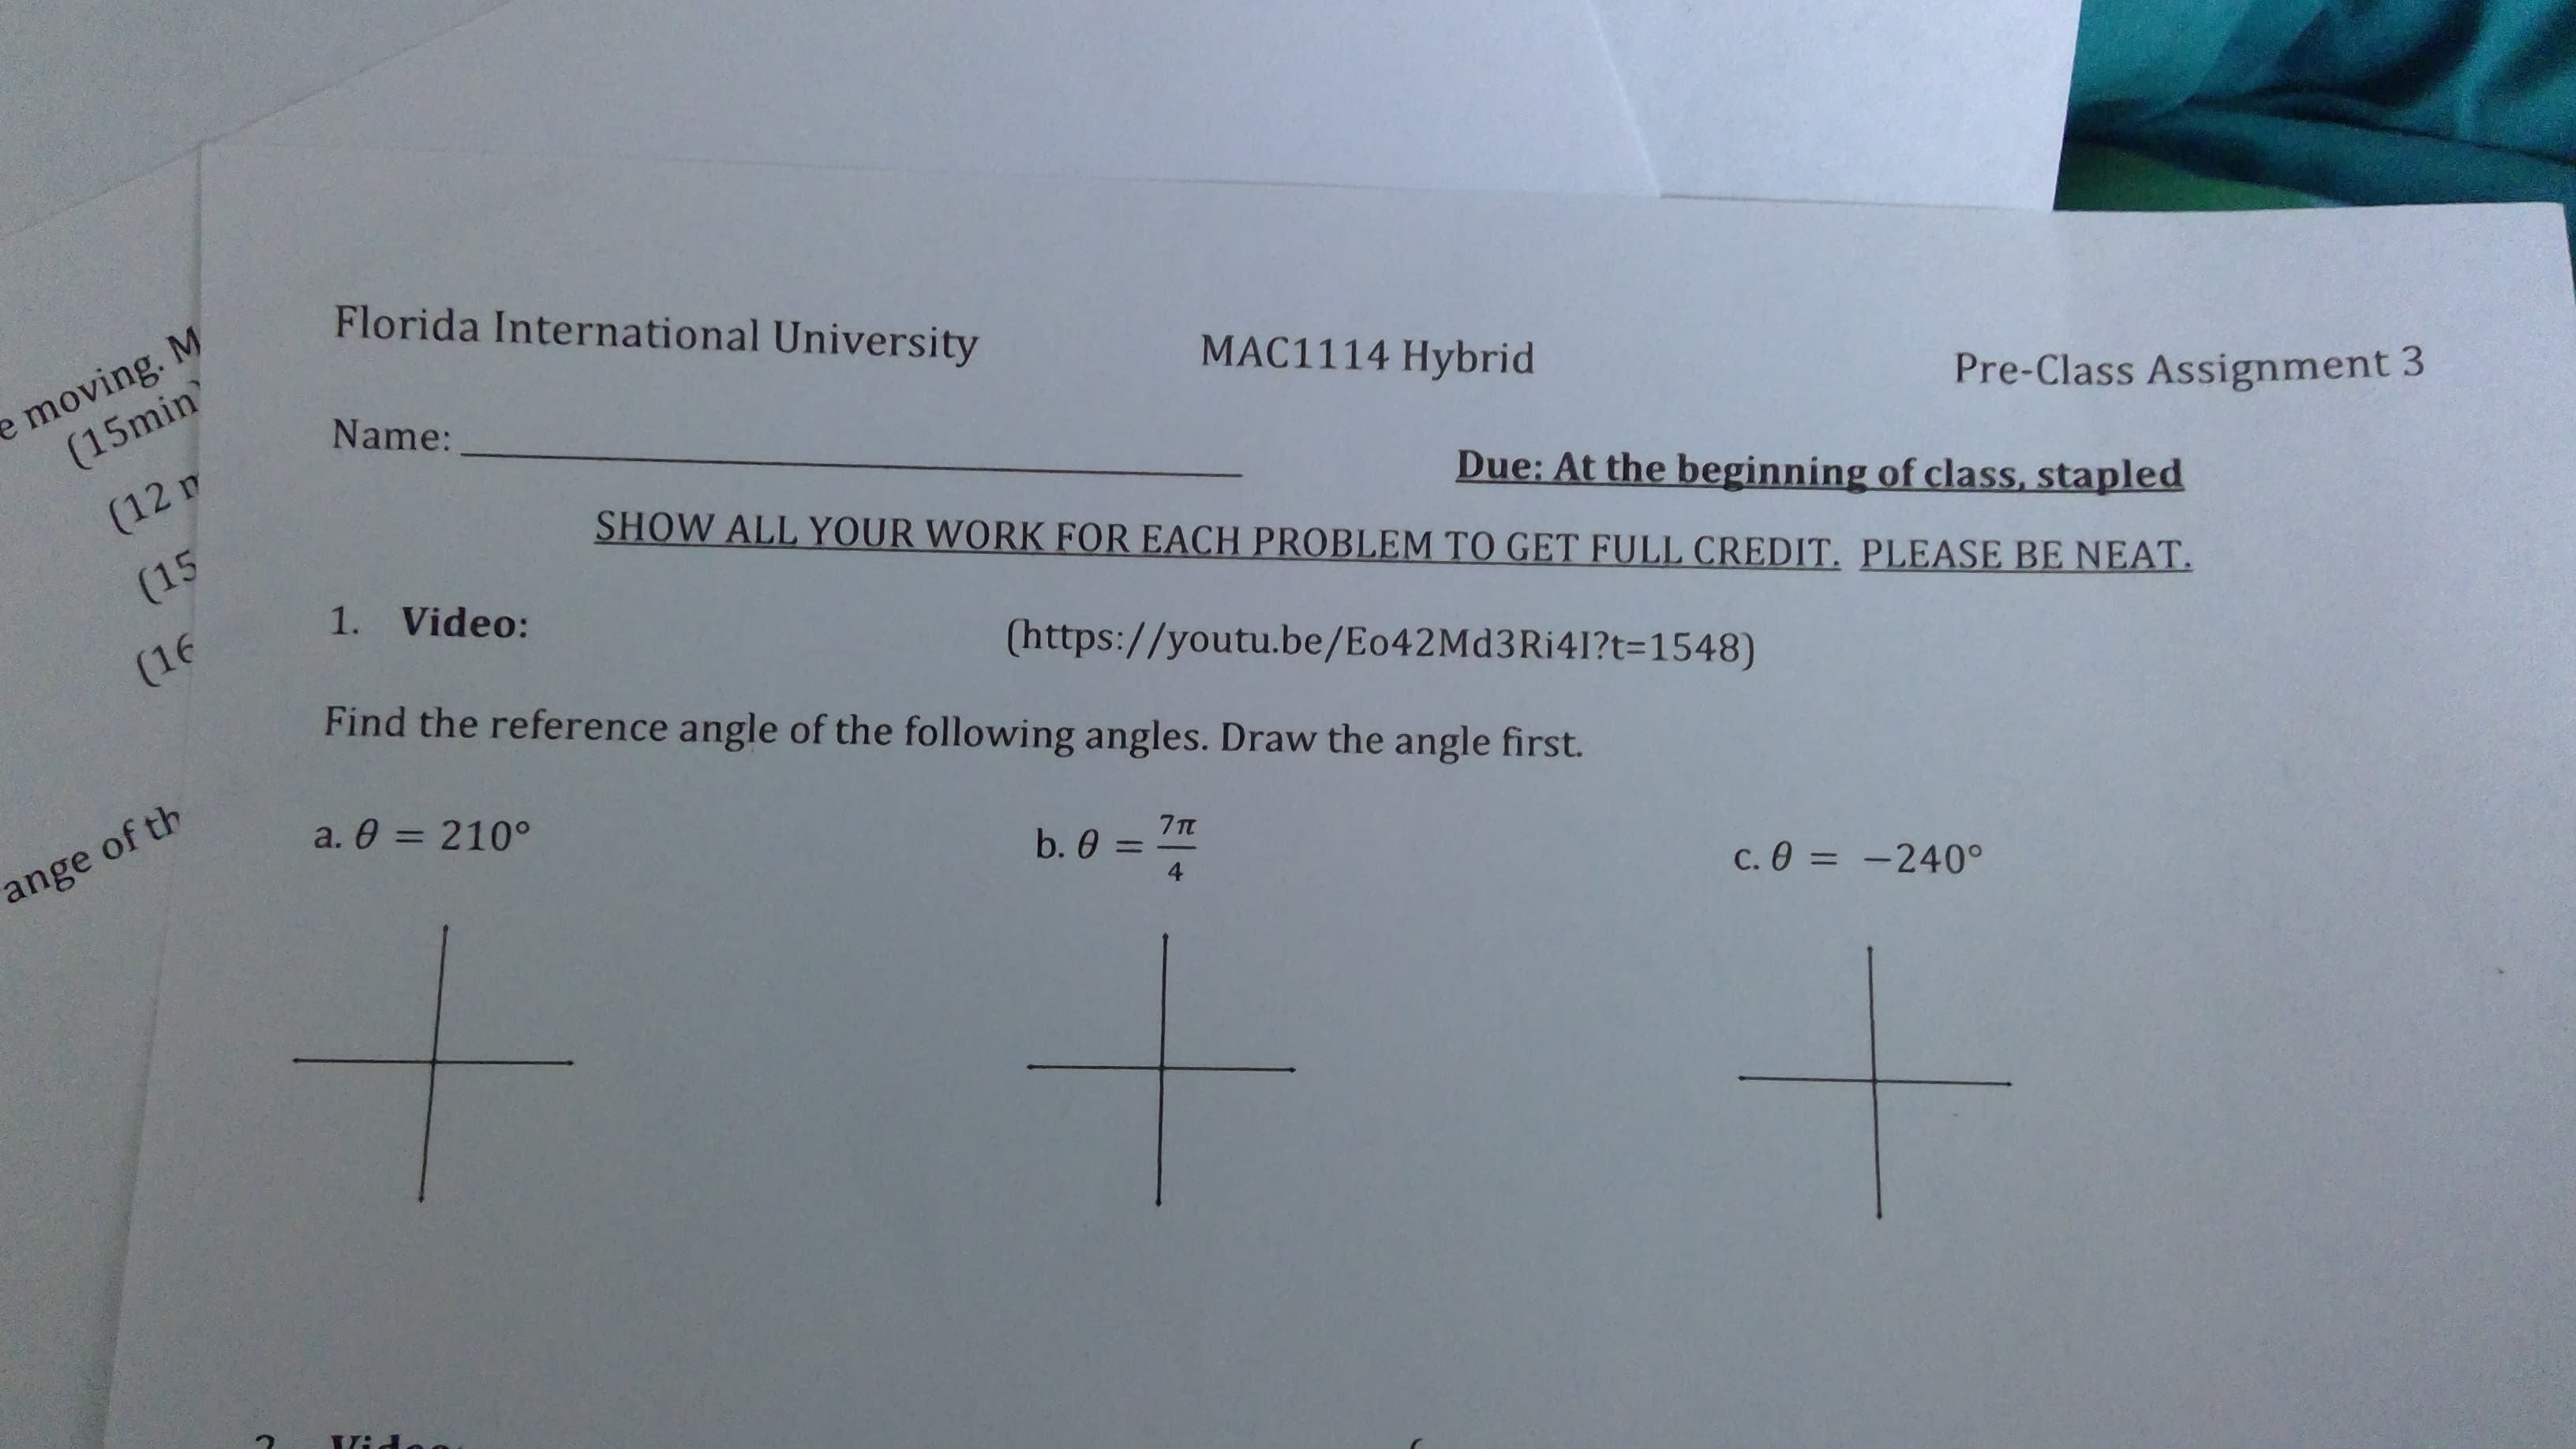 Florida International University
e moving. M
(15min
Name:
MAC1114 Hybrid
(12 m
Due: At the beginning of class, stapled
SHOW ALL YOUR WORK FOR EACH PROBLEM TO GET FULL CREDIT. PLEASE BE NEAT.
(15
Pre-Class Assignment 3
1. Video:
(16
Find the reference angle of the following angles. Draw the angle first.
(https://youtu.be/Eo42Md3Ri41?t=1548)
a. 0 = 210°
ange of th
b. 0 =
%3D
C. 0 =
-240°
